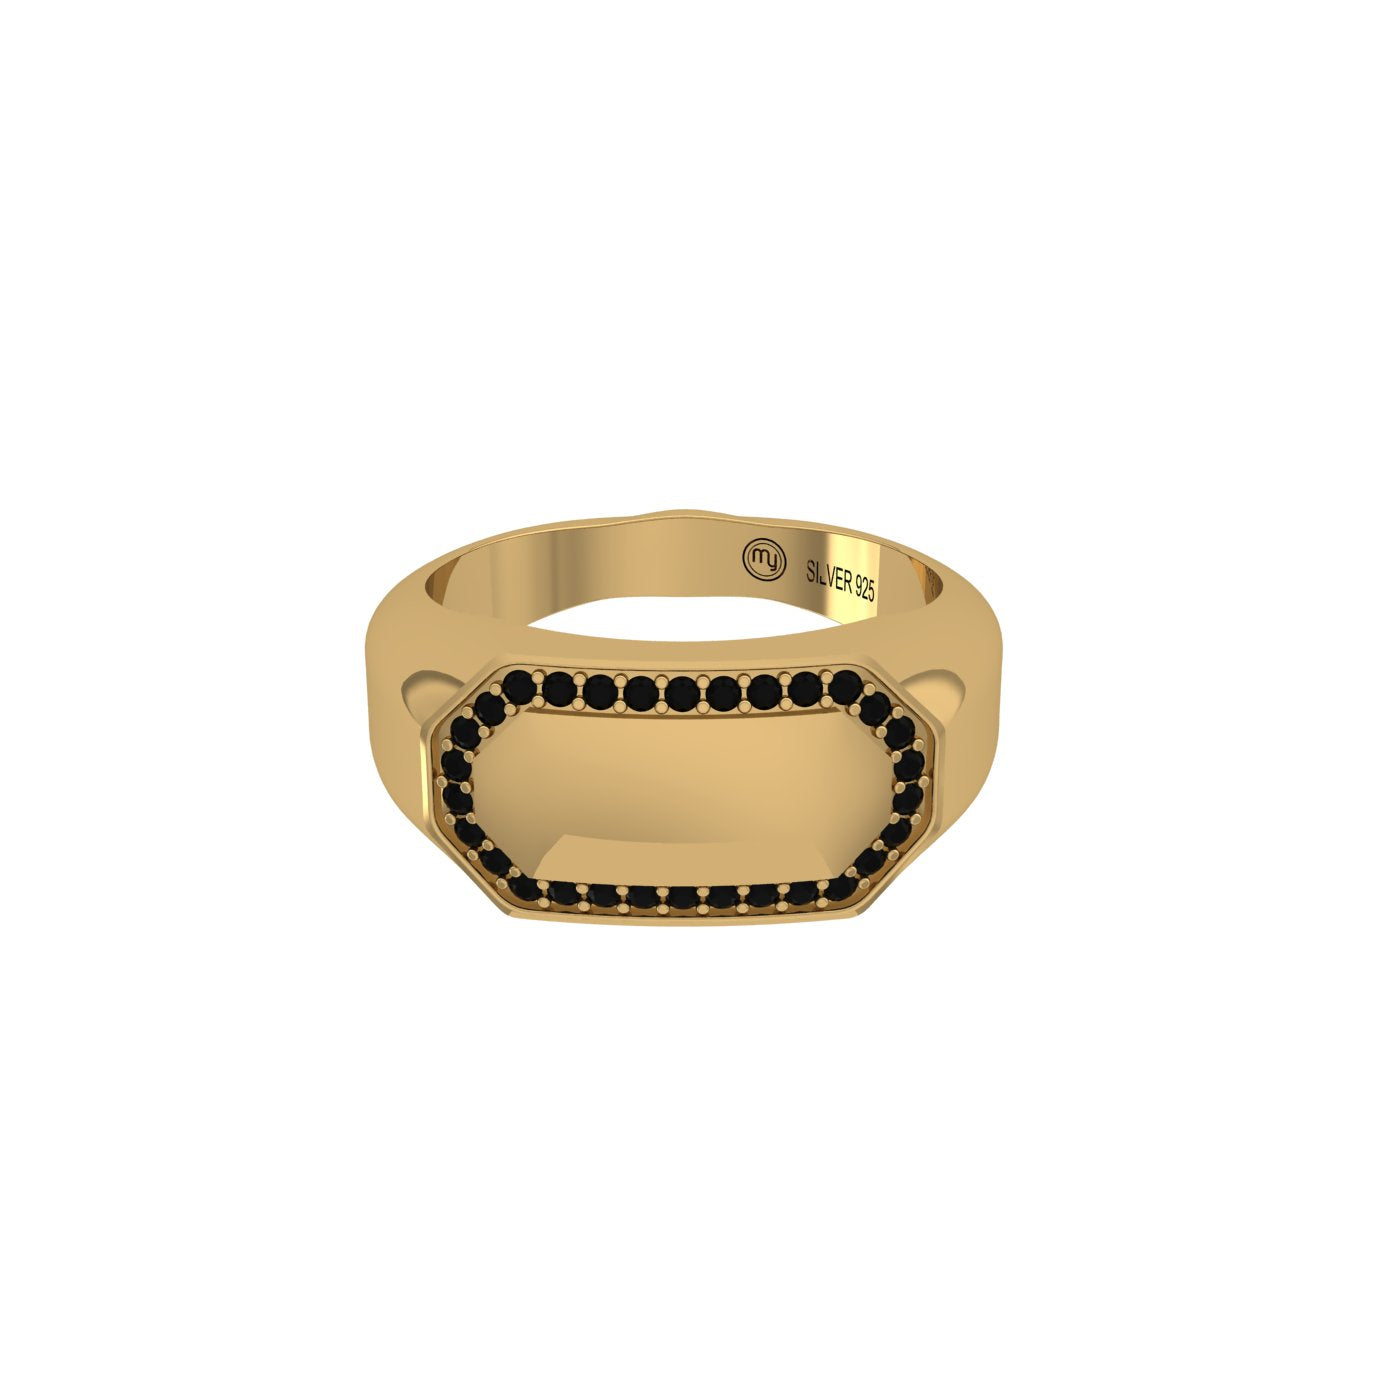 The Confident Sturdy Men's Ring